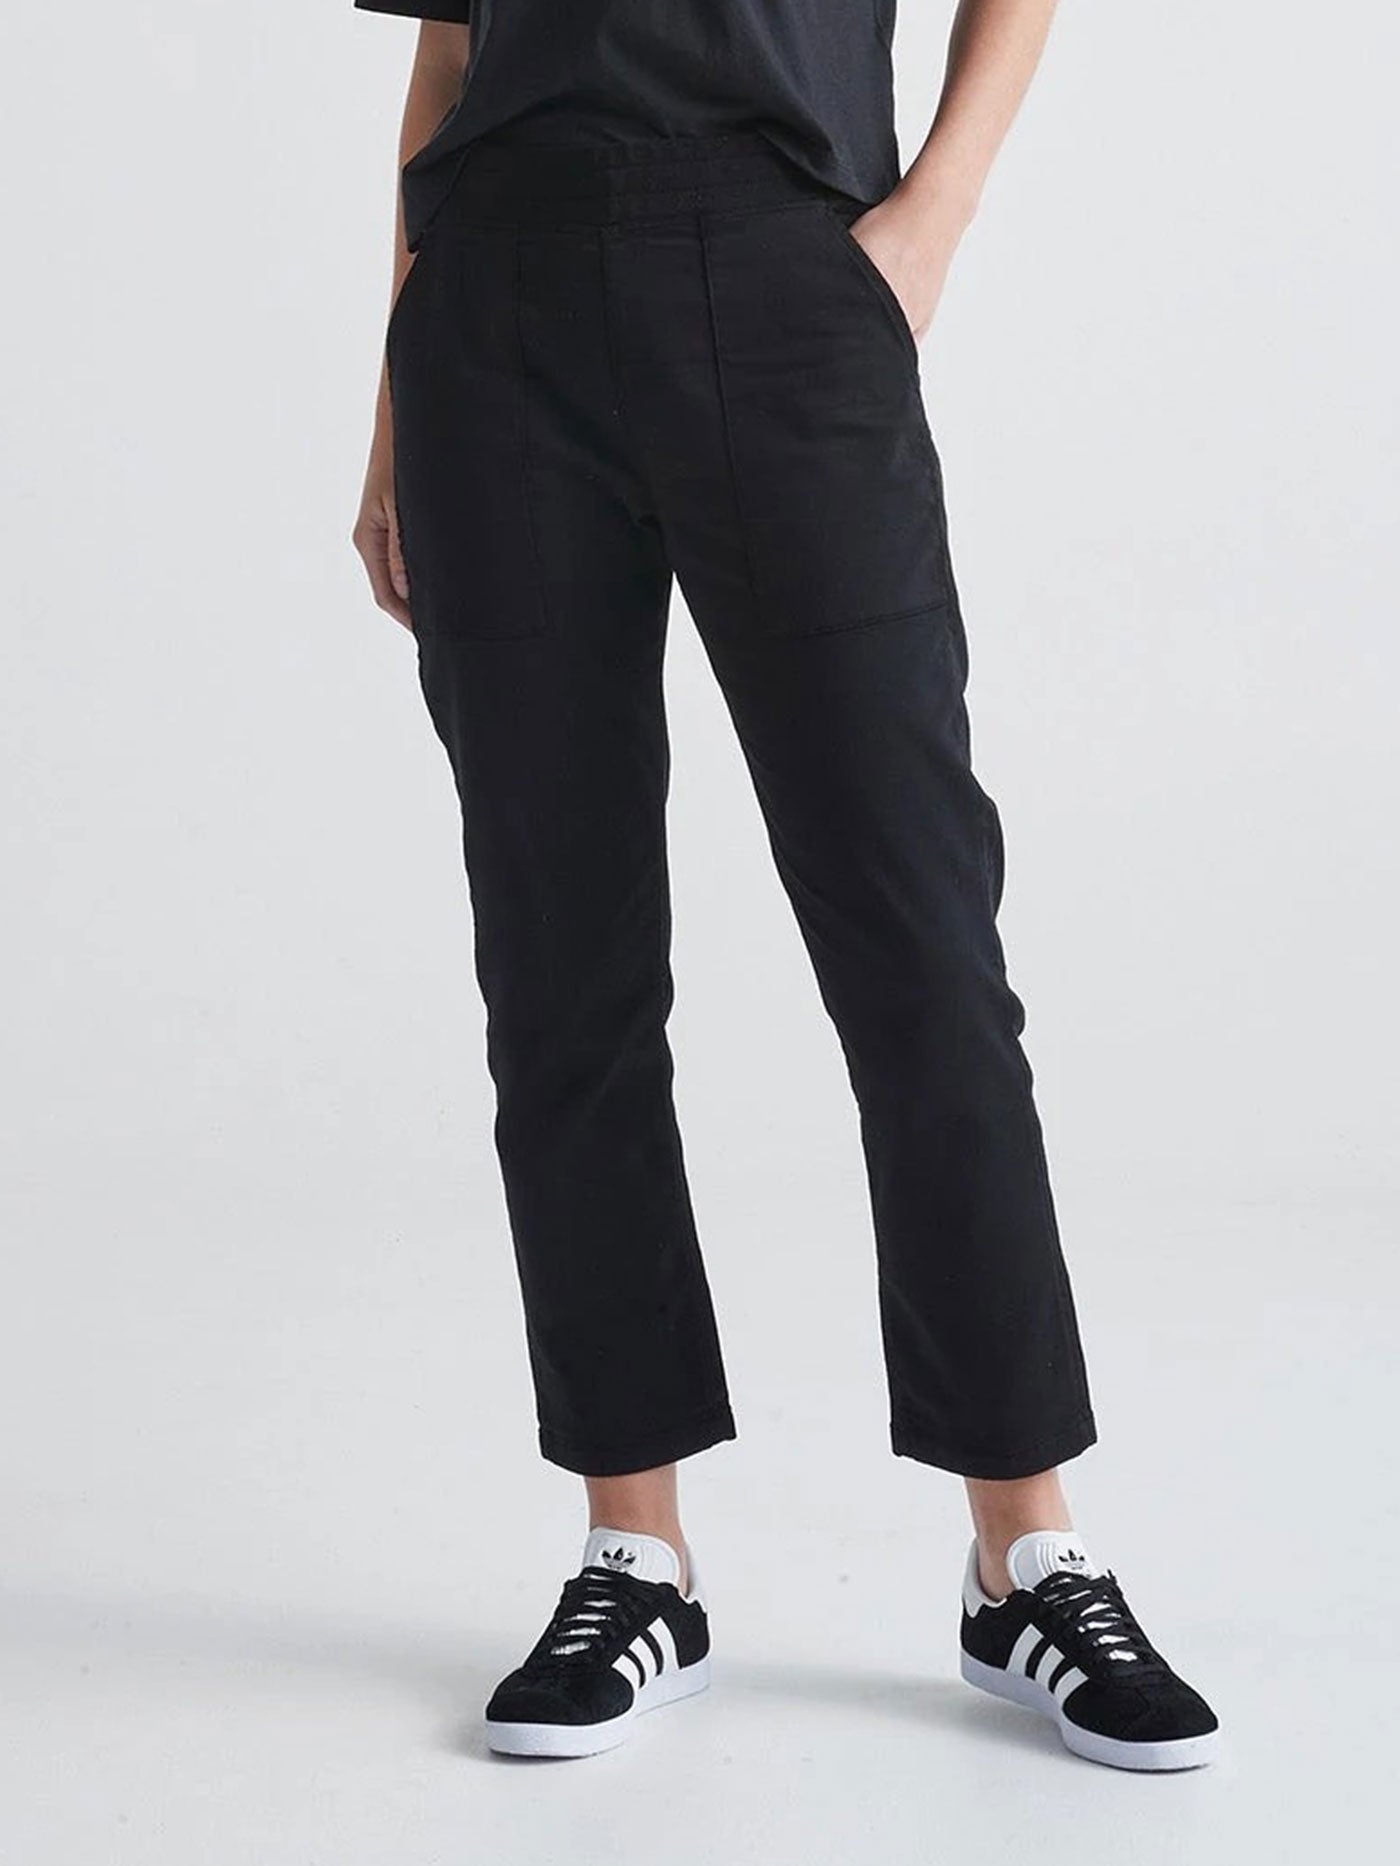 Duer No Sweat Everyday Pants